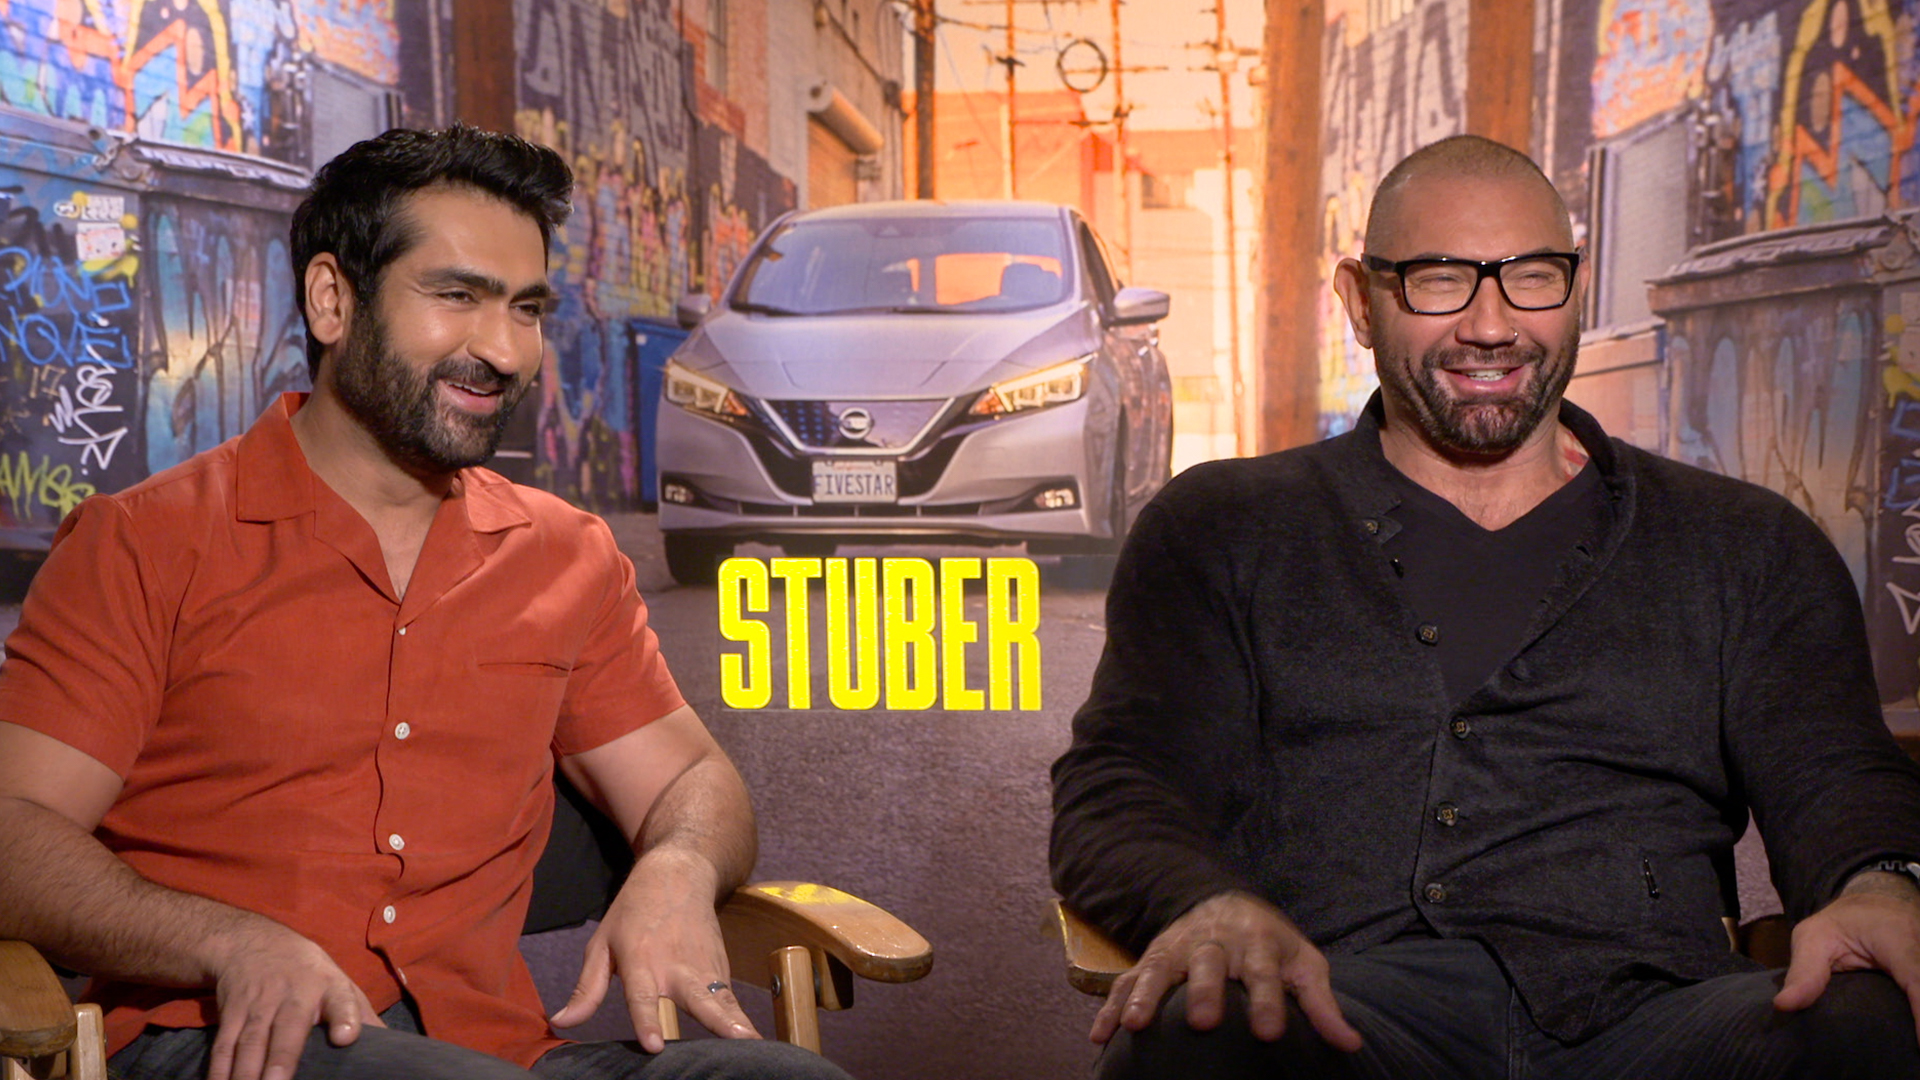 Stuber: Dave Bautista and Kumail Nanjiani on Their Buddy Cop Action